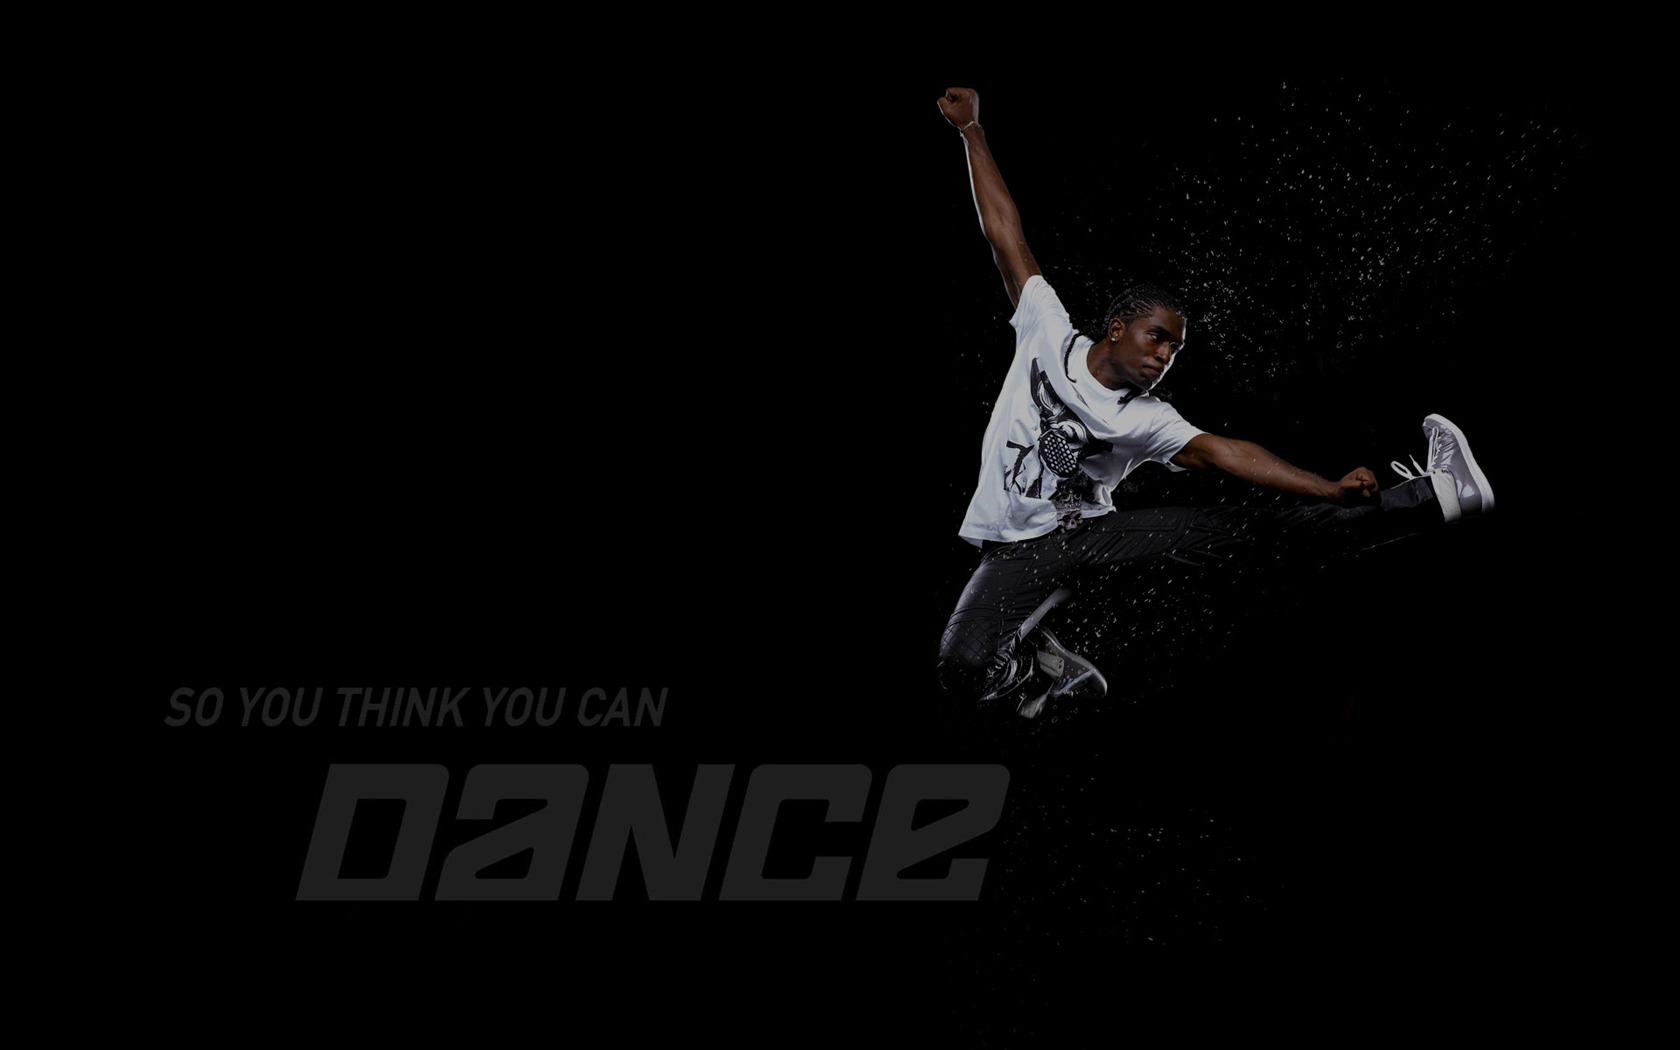 So You Think You Can Dance 舞林争霸 壁纸(二)4 - 1680x1050